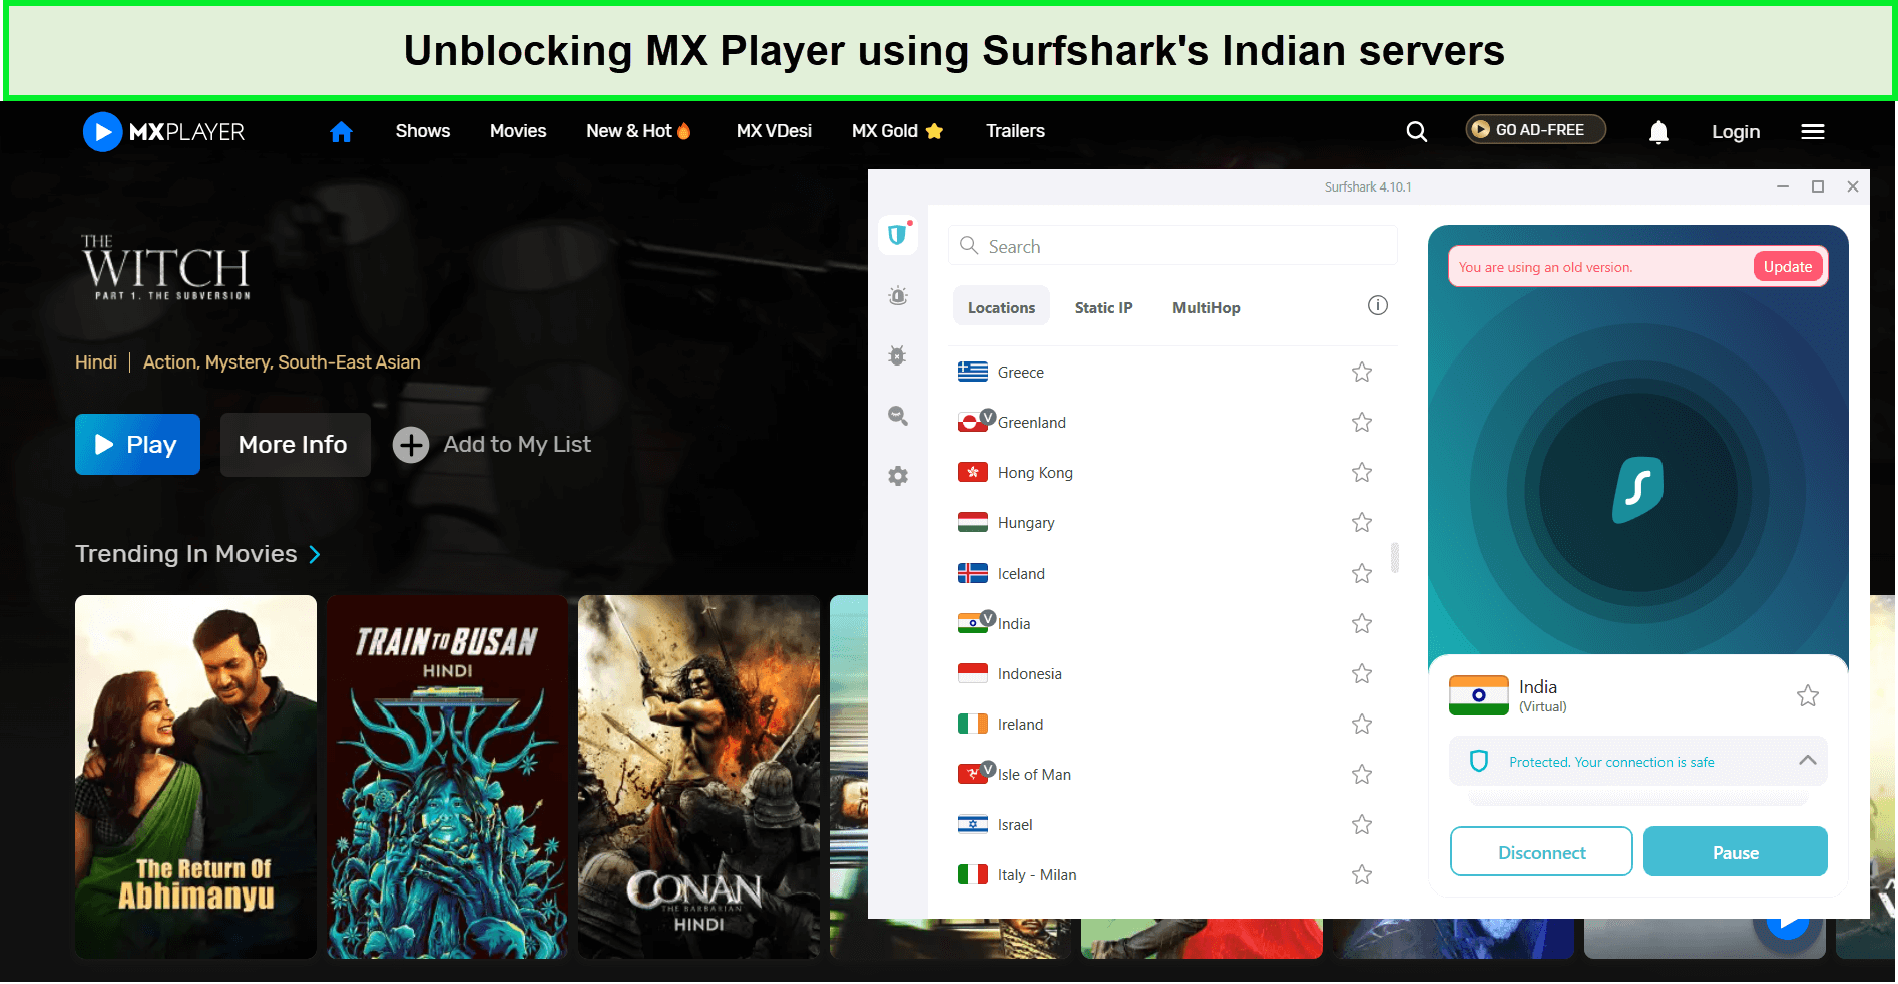 mx-player-in-USA-unblocked-surfshark